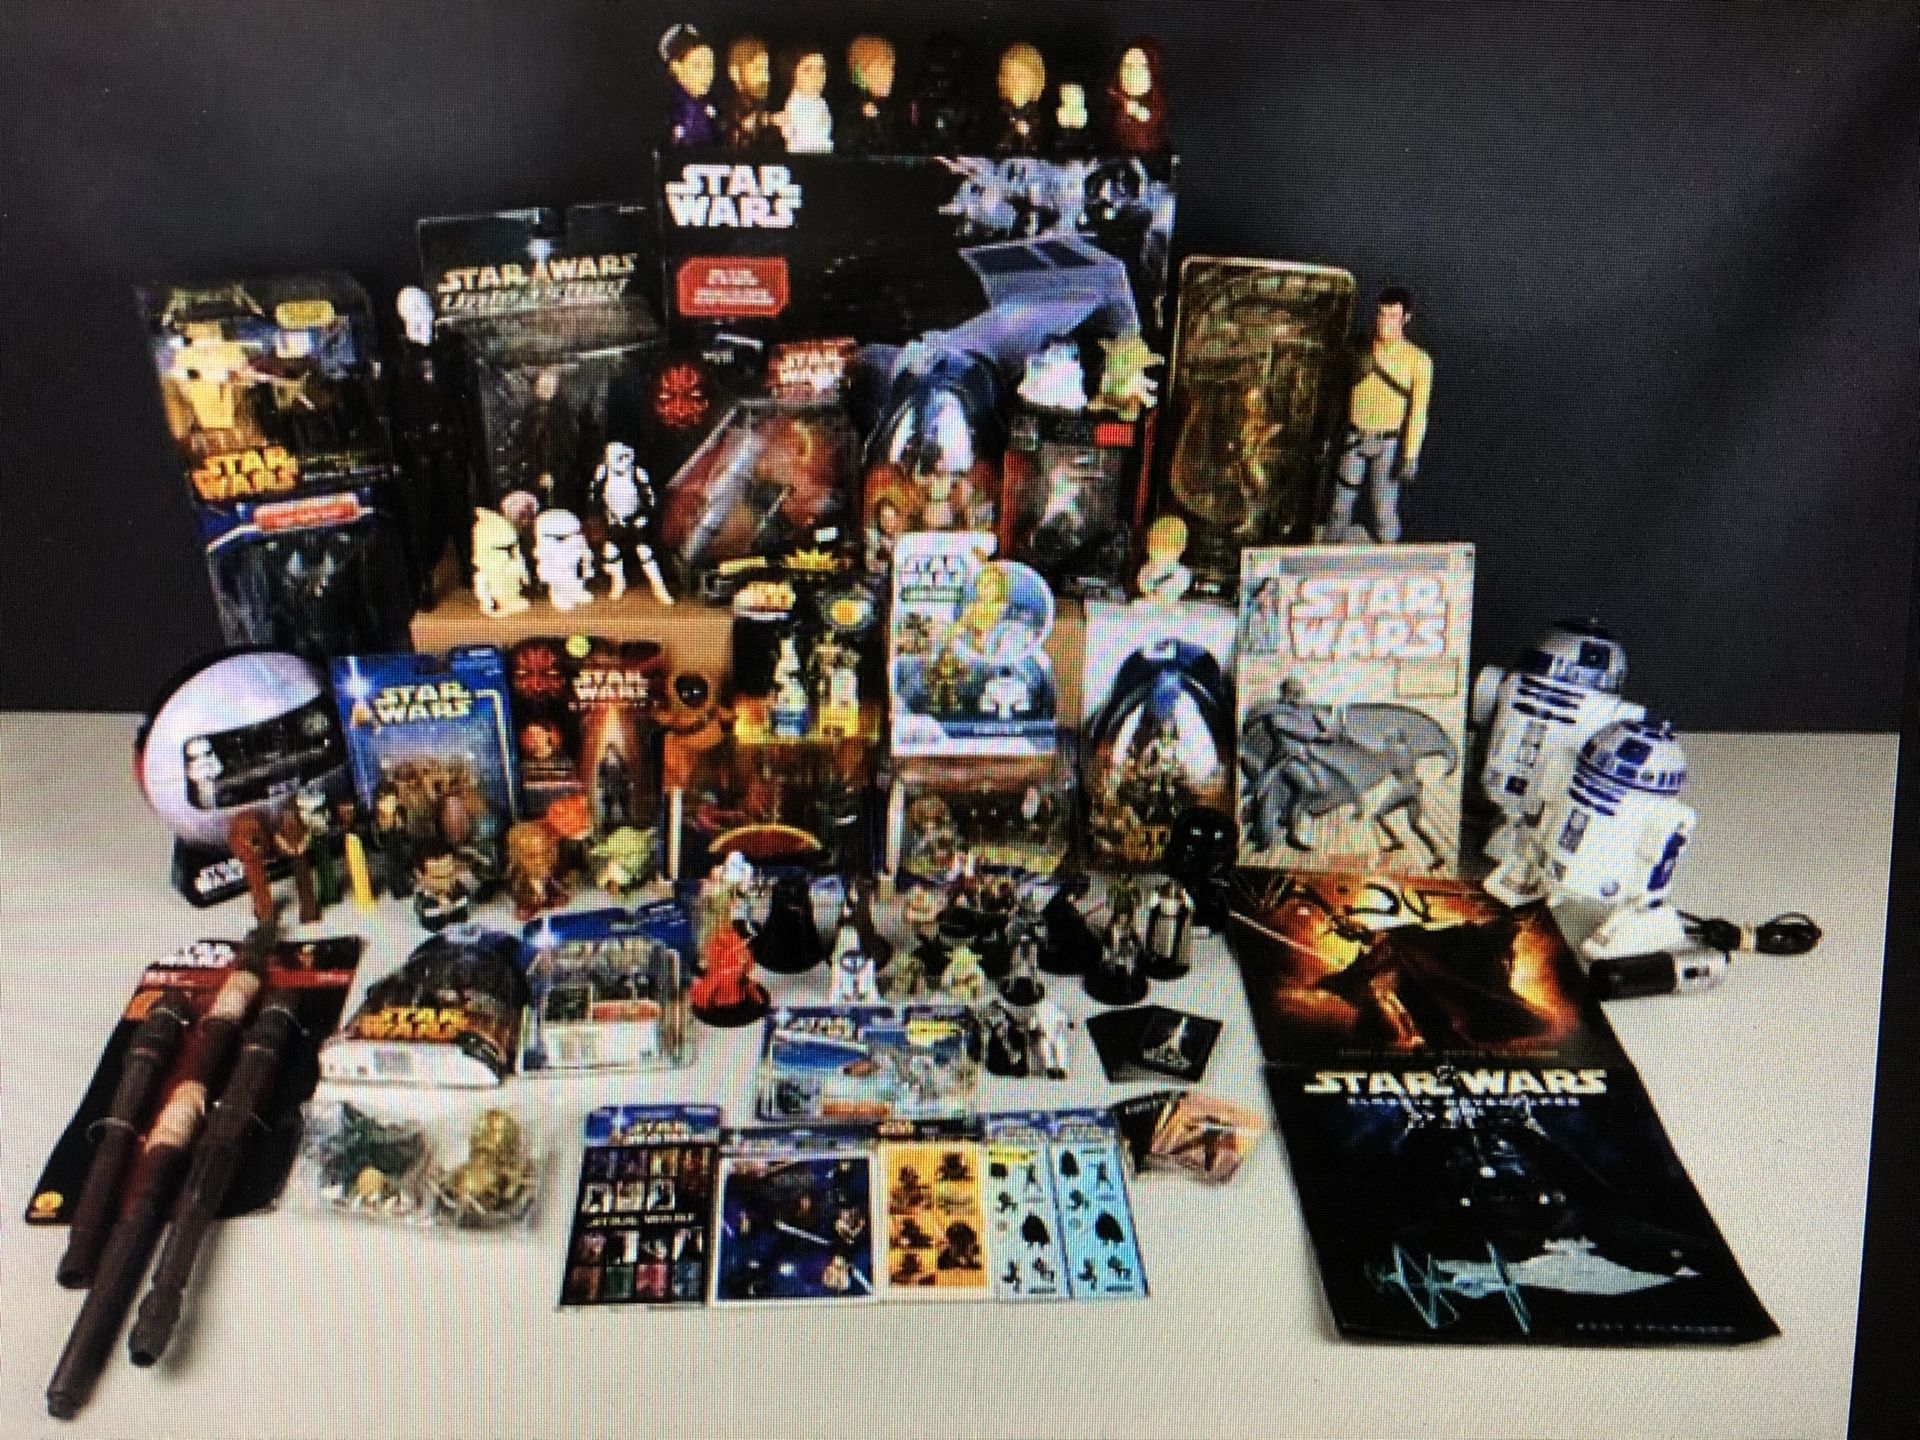 Star Wars collectables - Action figures, books and more